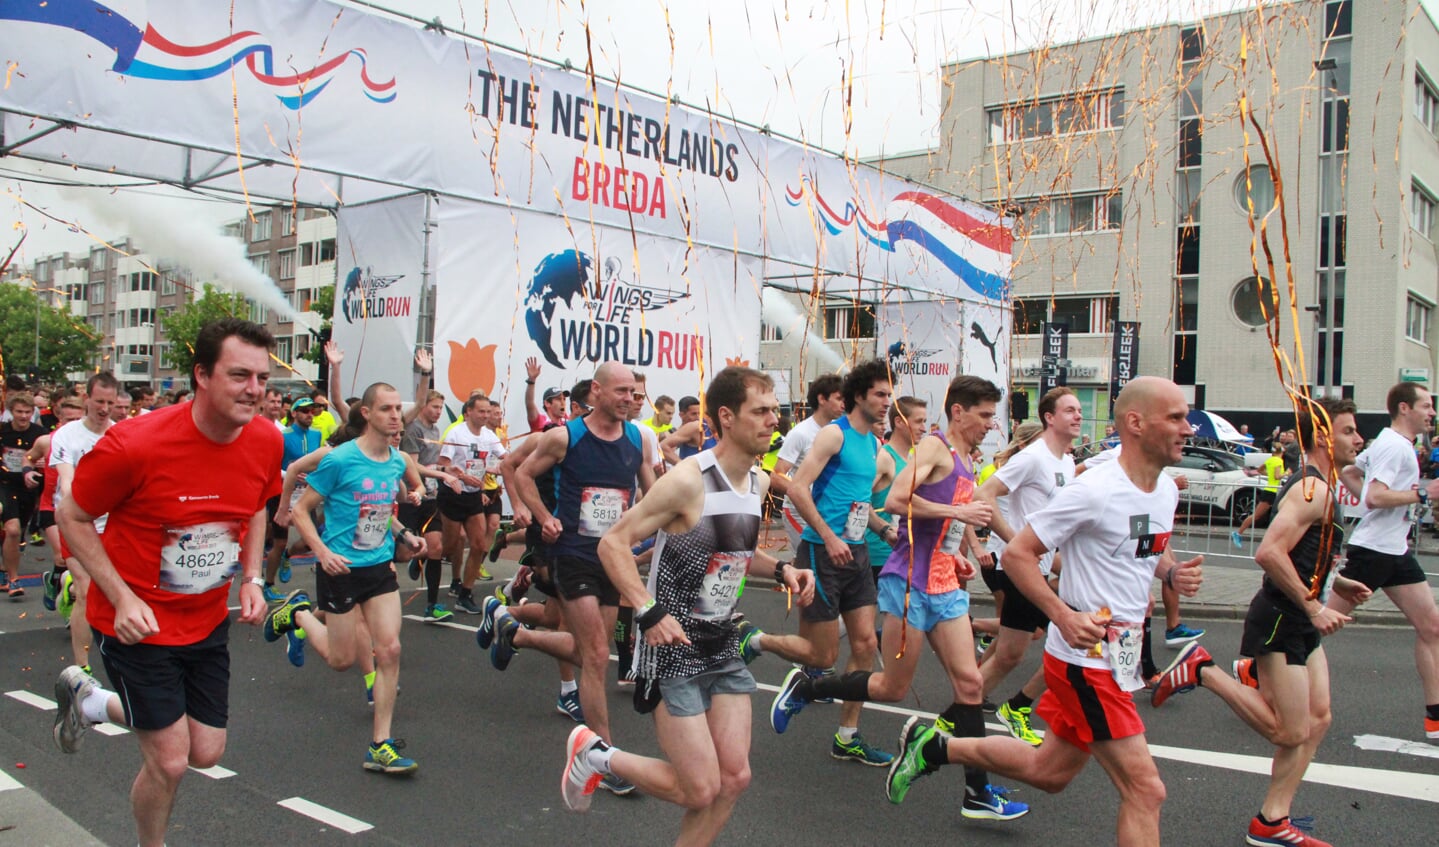 Wings for Life World Run 2017